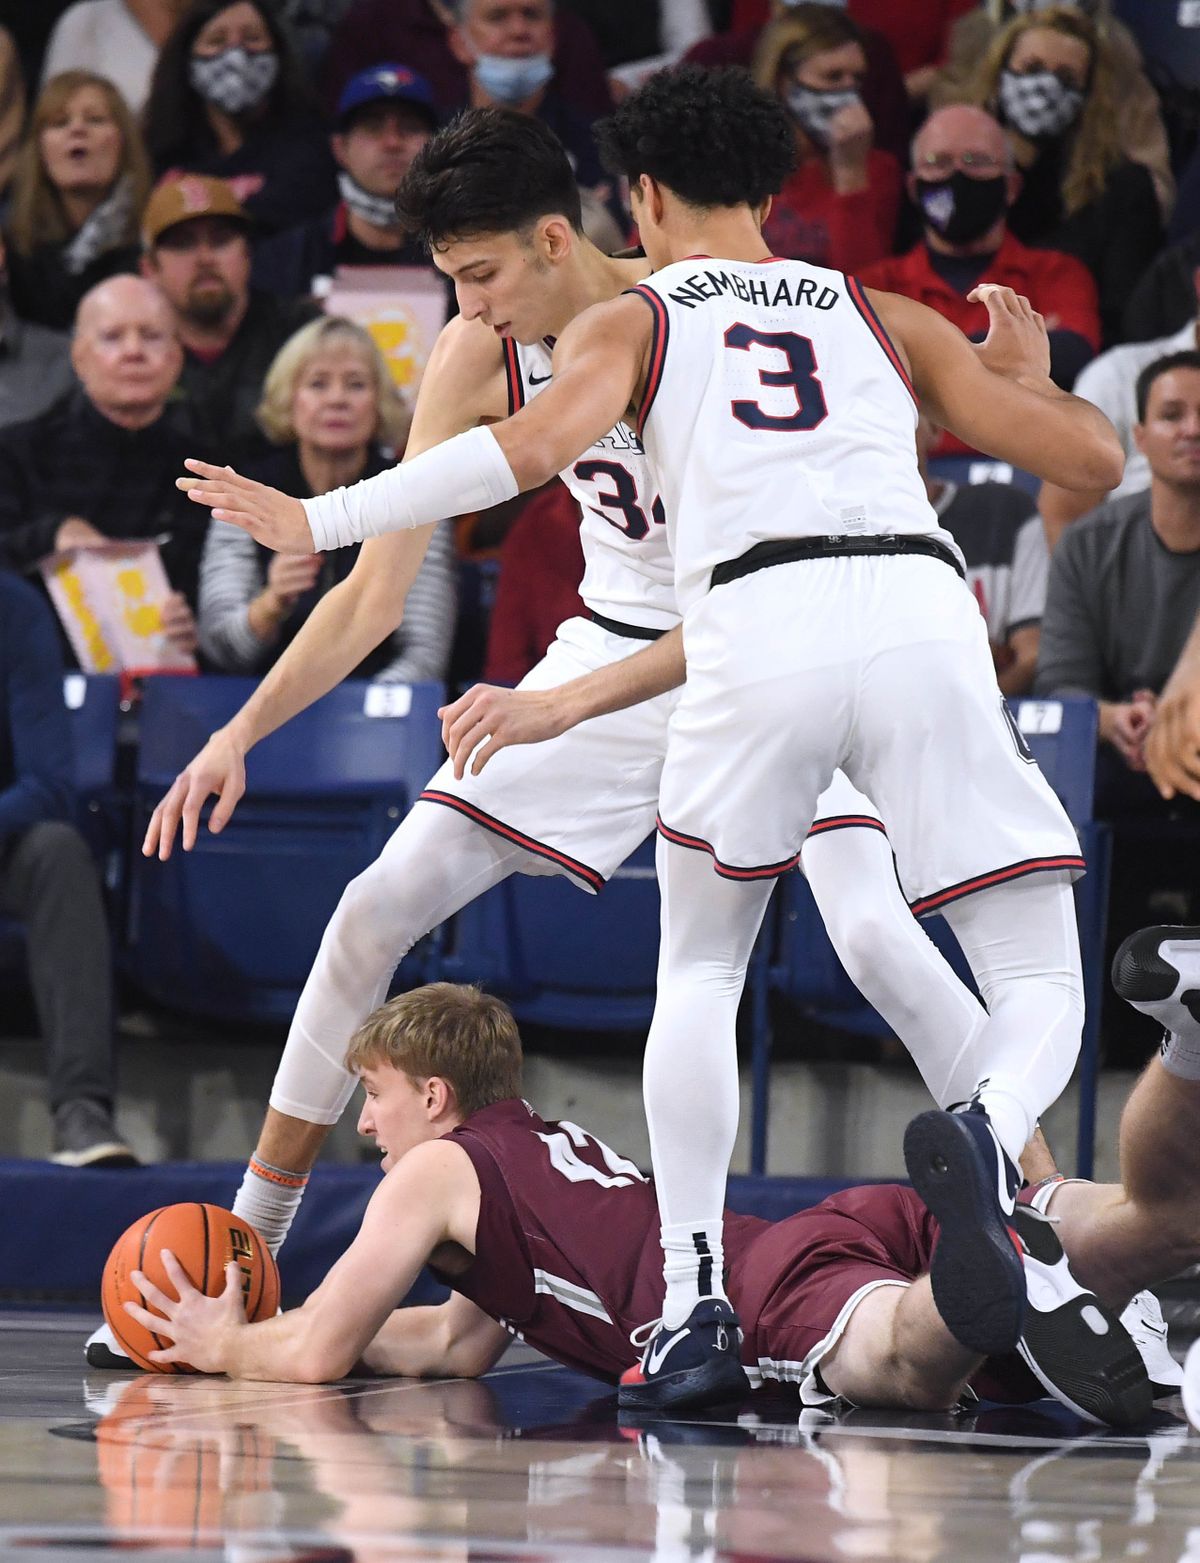 Gonzaga center Chet Holmgren (34) and Gonzaga guard Andrew Nembhard (3) tower over Bellarmine forward Curt Hopf (42) as he scrambles for a loose ball during the first half of an NCAA college basketball game, Friday, Nov. 19, 2021, in the McCarthey Athletic Center.  (COLIN MULVANY/THE SPOKESMAN-REVIEW)